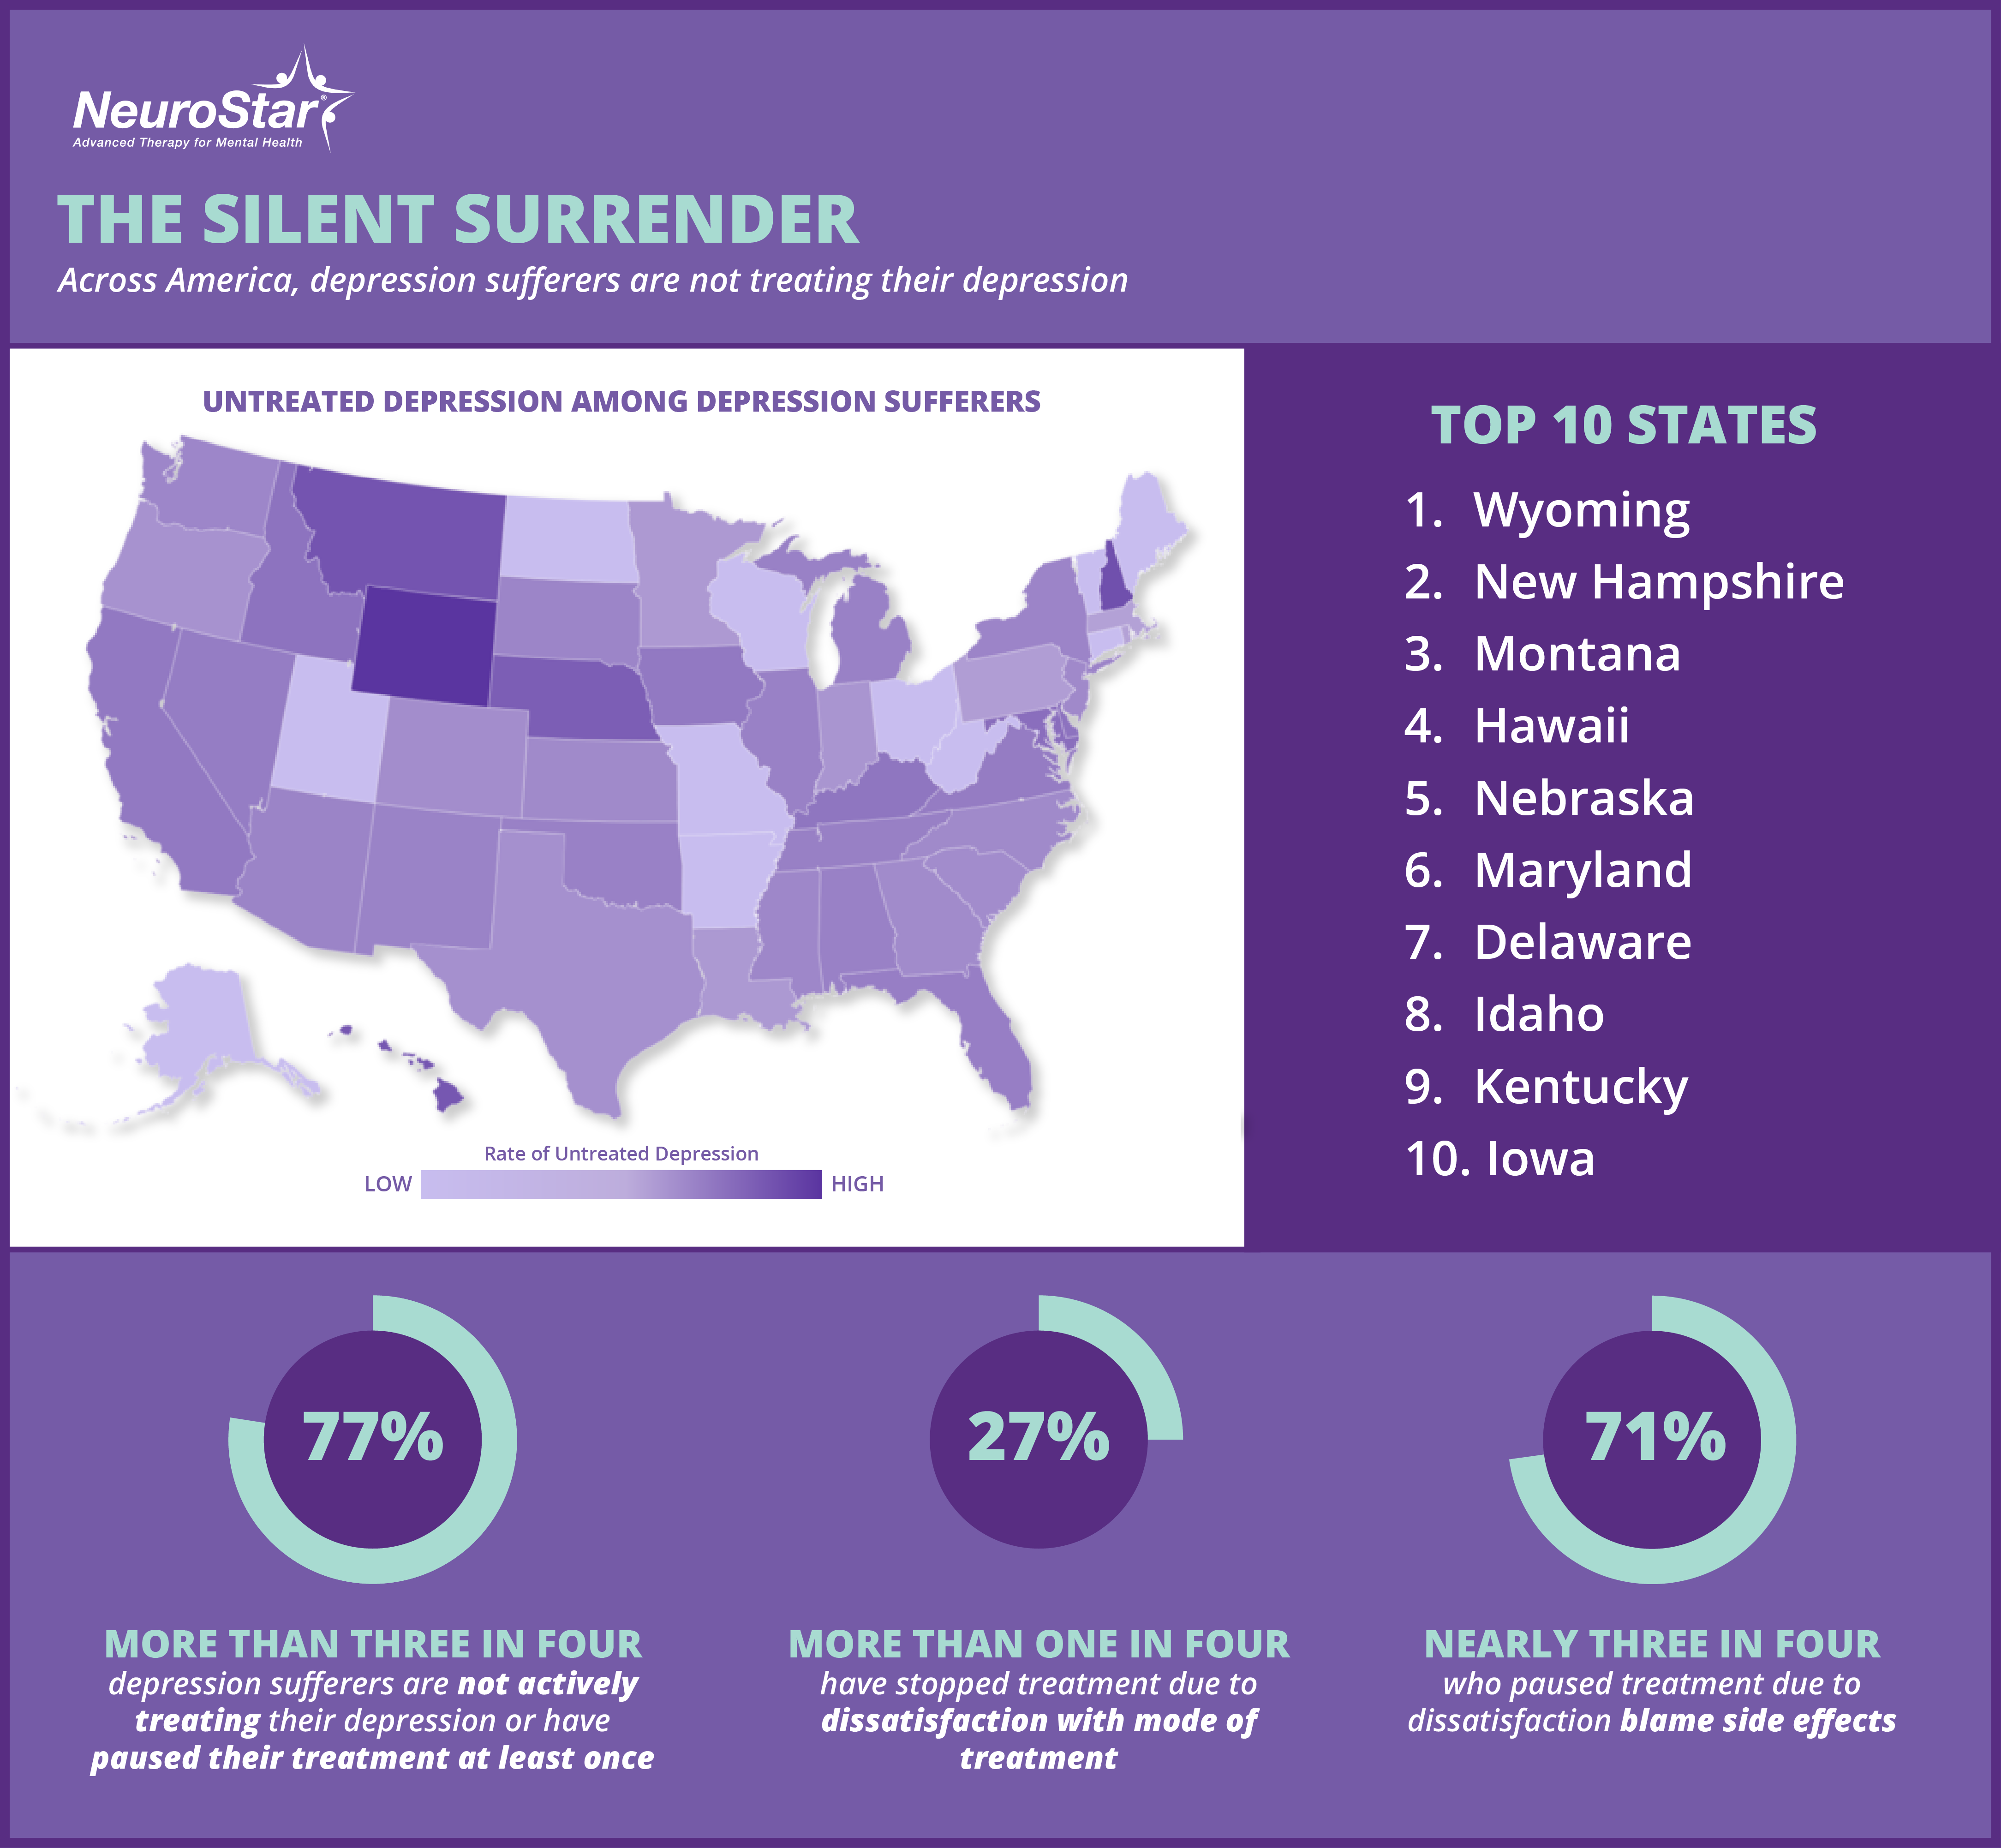 FocalData survey results released by NeuroStar show the prevalence of untreated depression among U.S. depression sufferers across the United States.